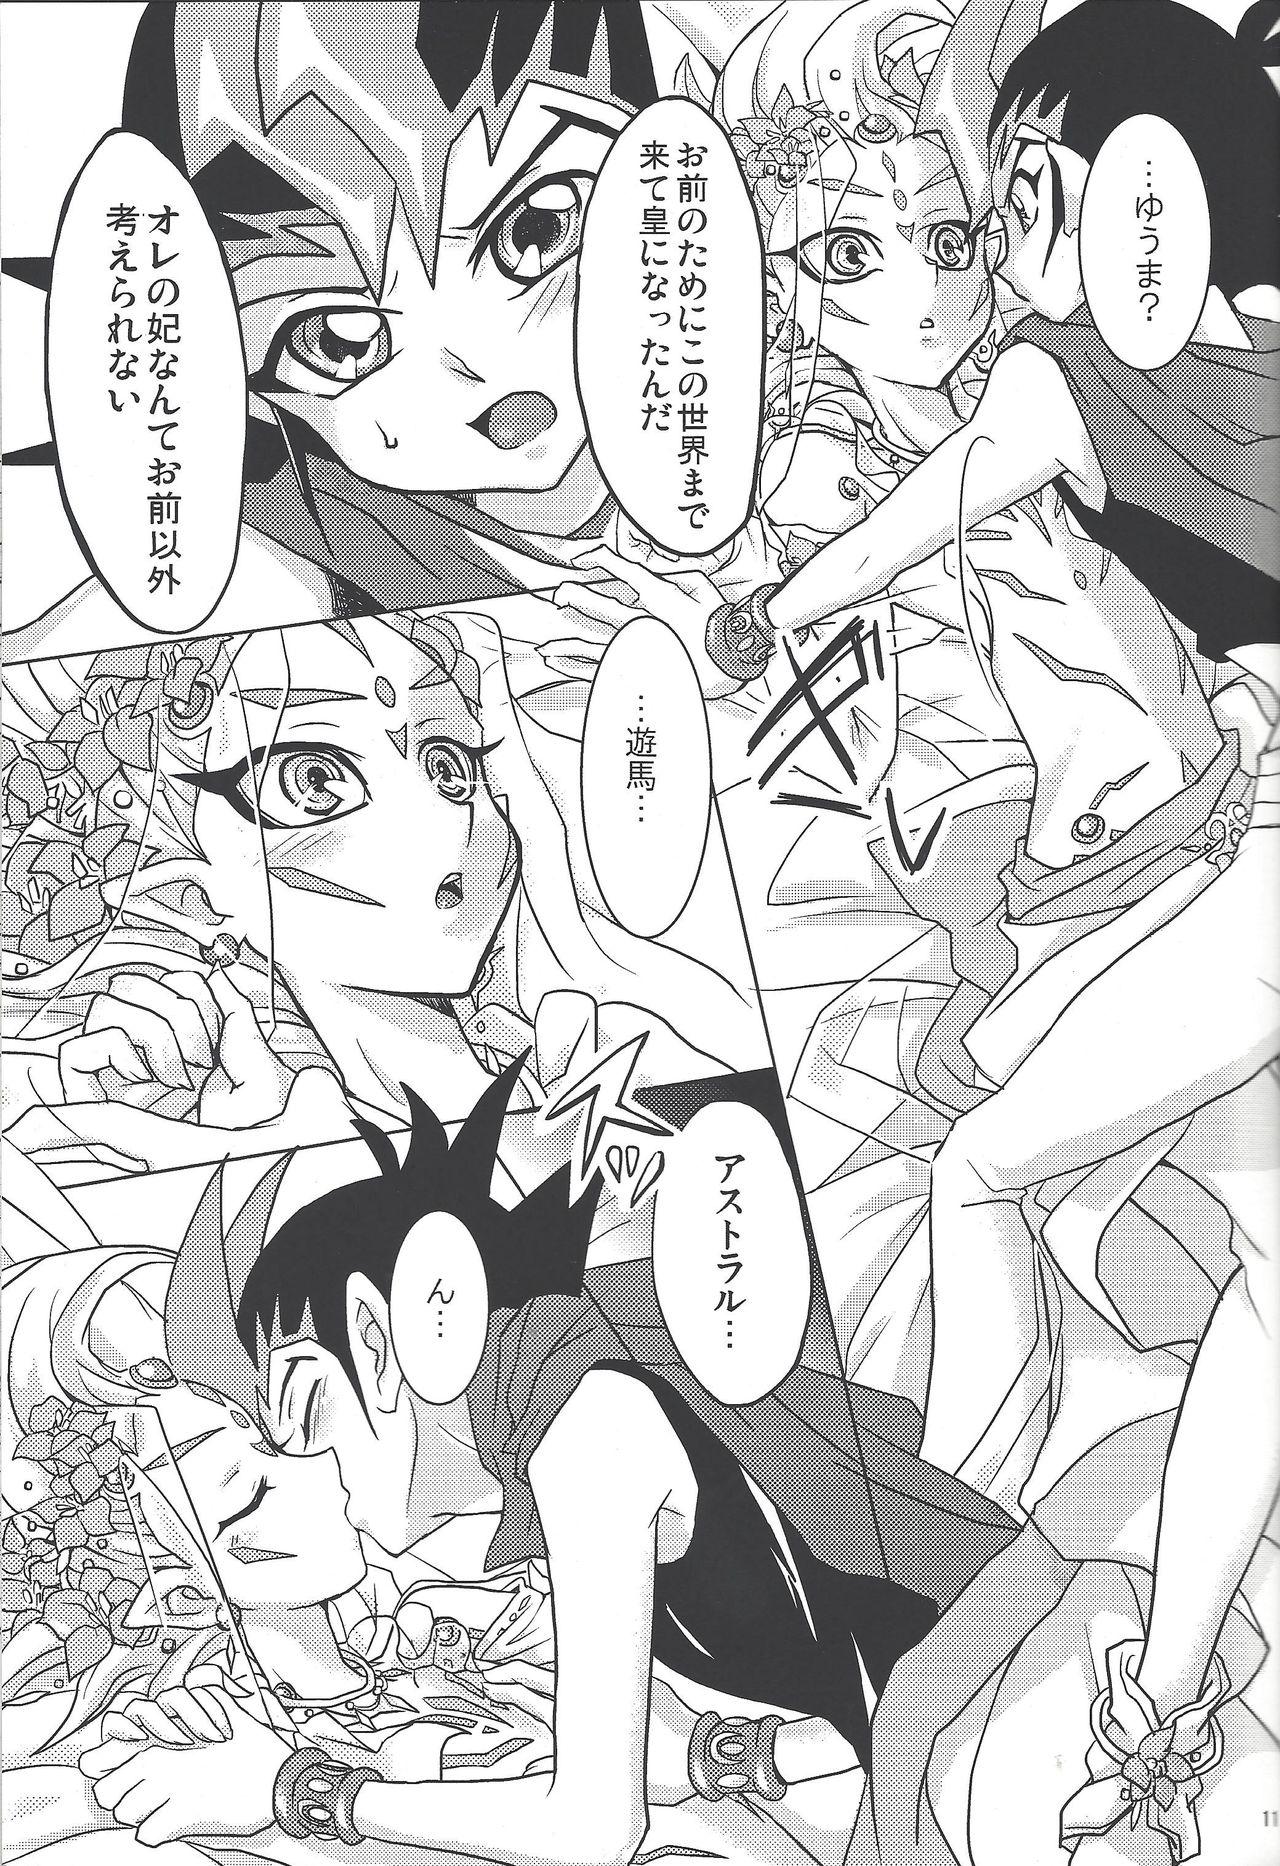 Hot Girl Porn ASTRAL WEDDING - Yu gi oh zexal Party - Page 9